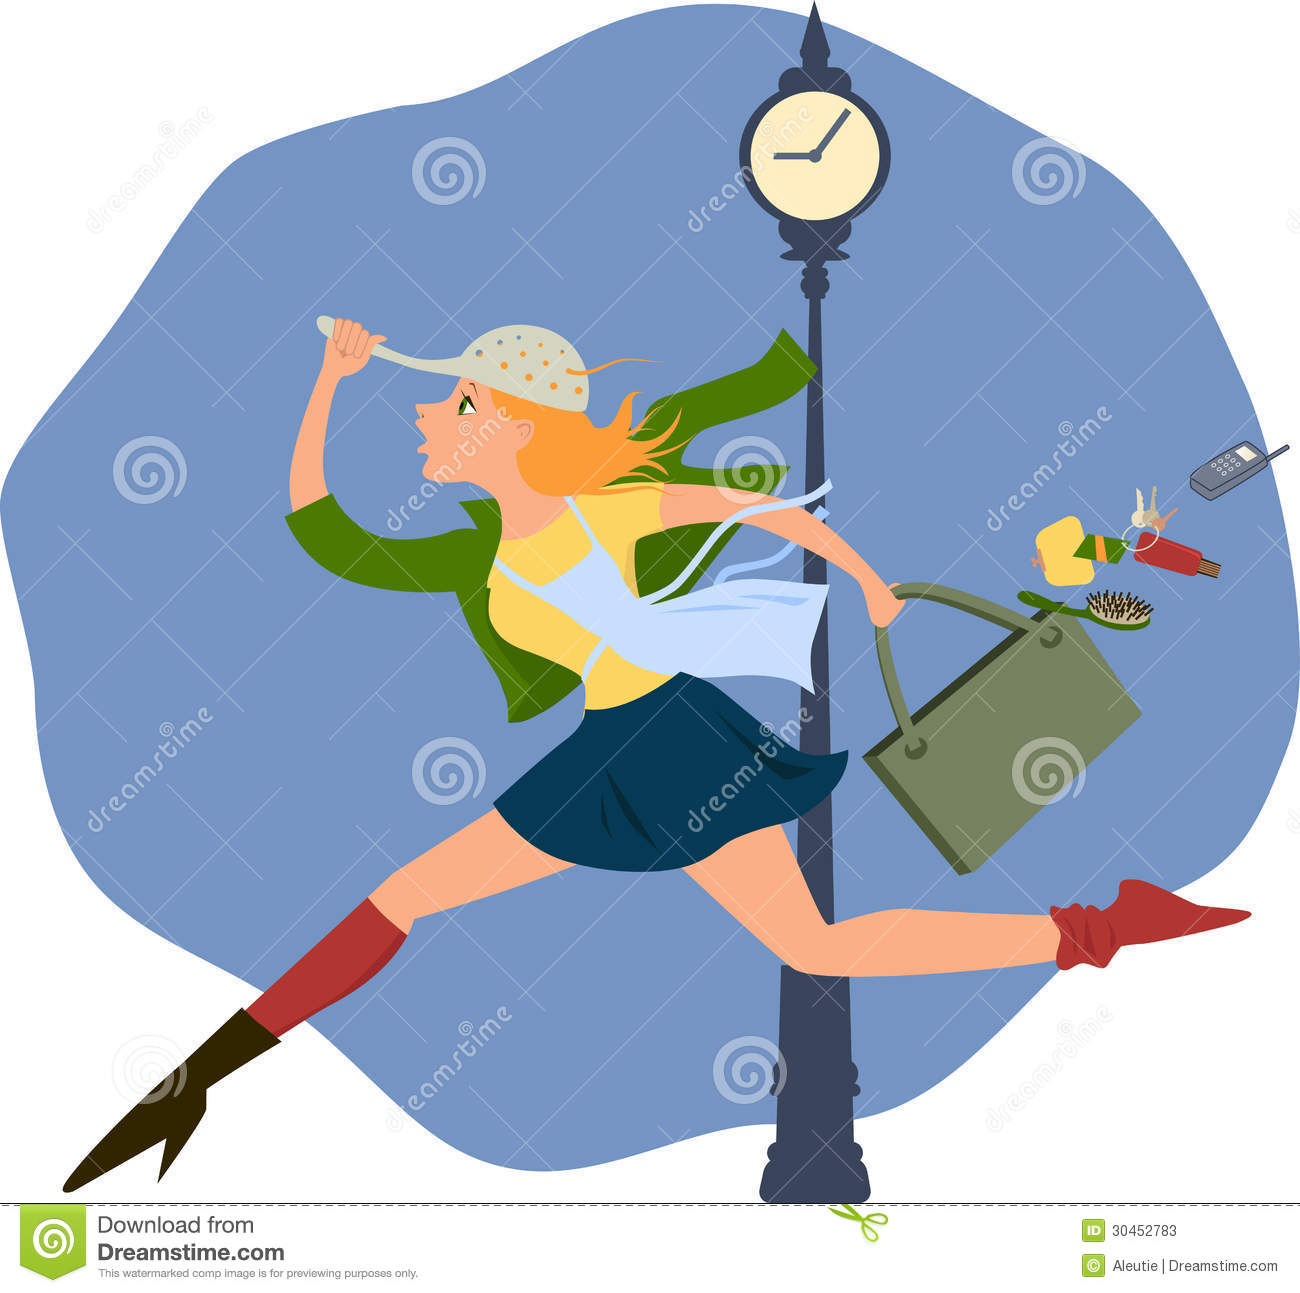 Cartoon Of A Young Woman In A Hurry Running Half Dressed And Loosing